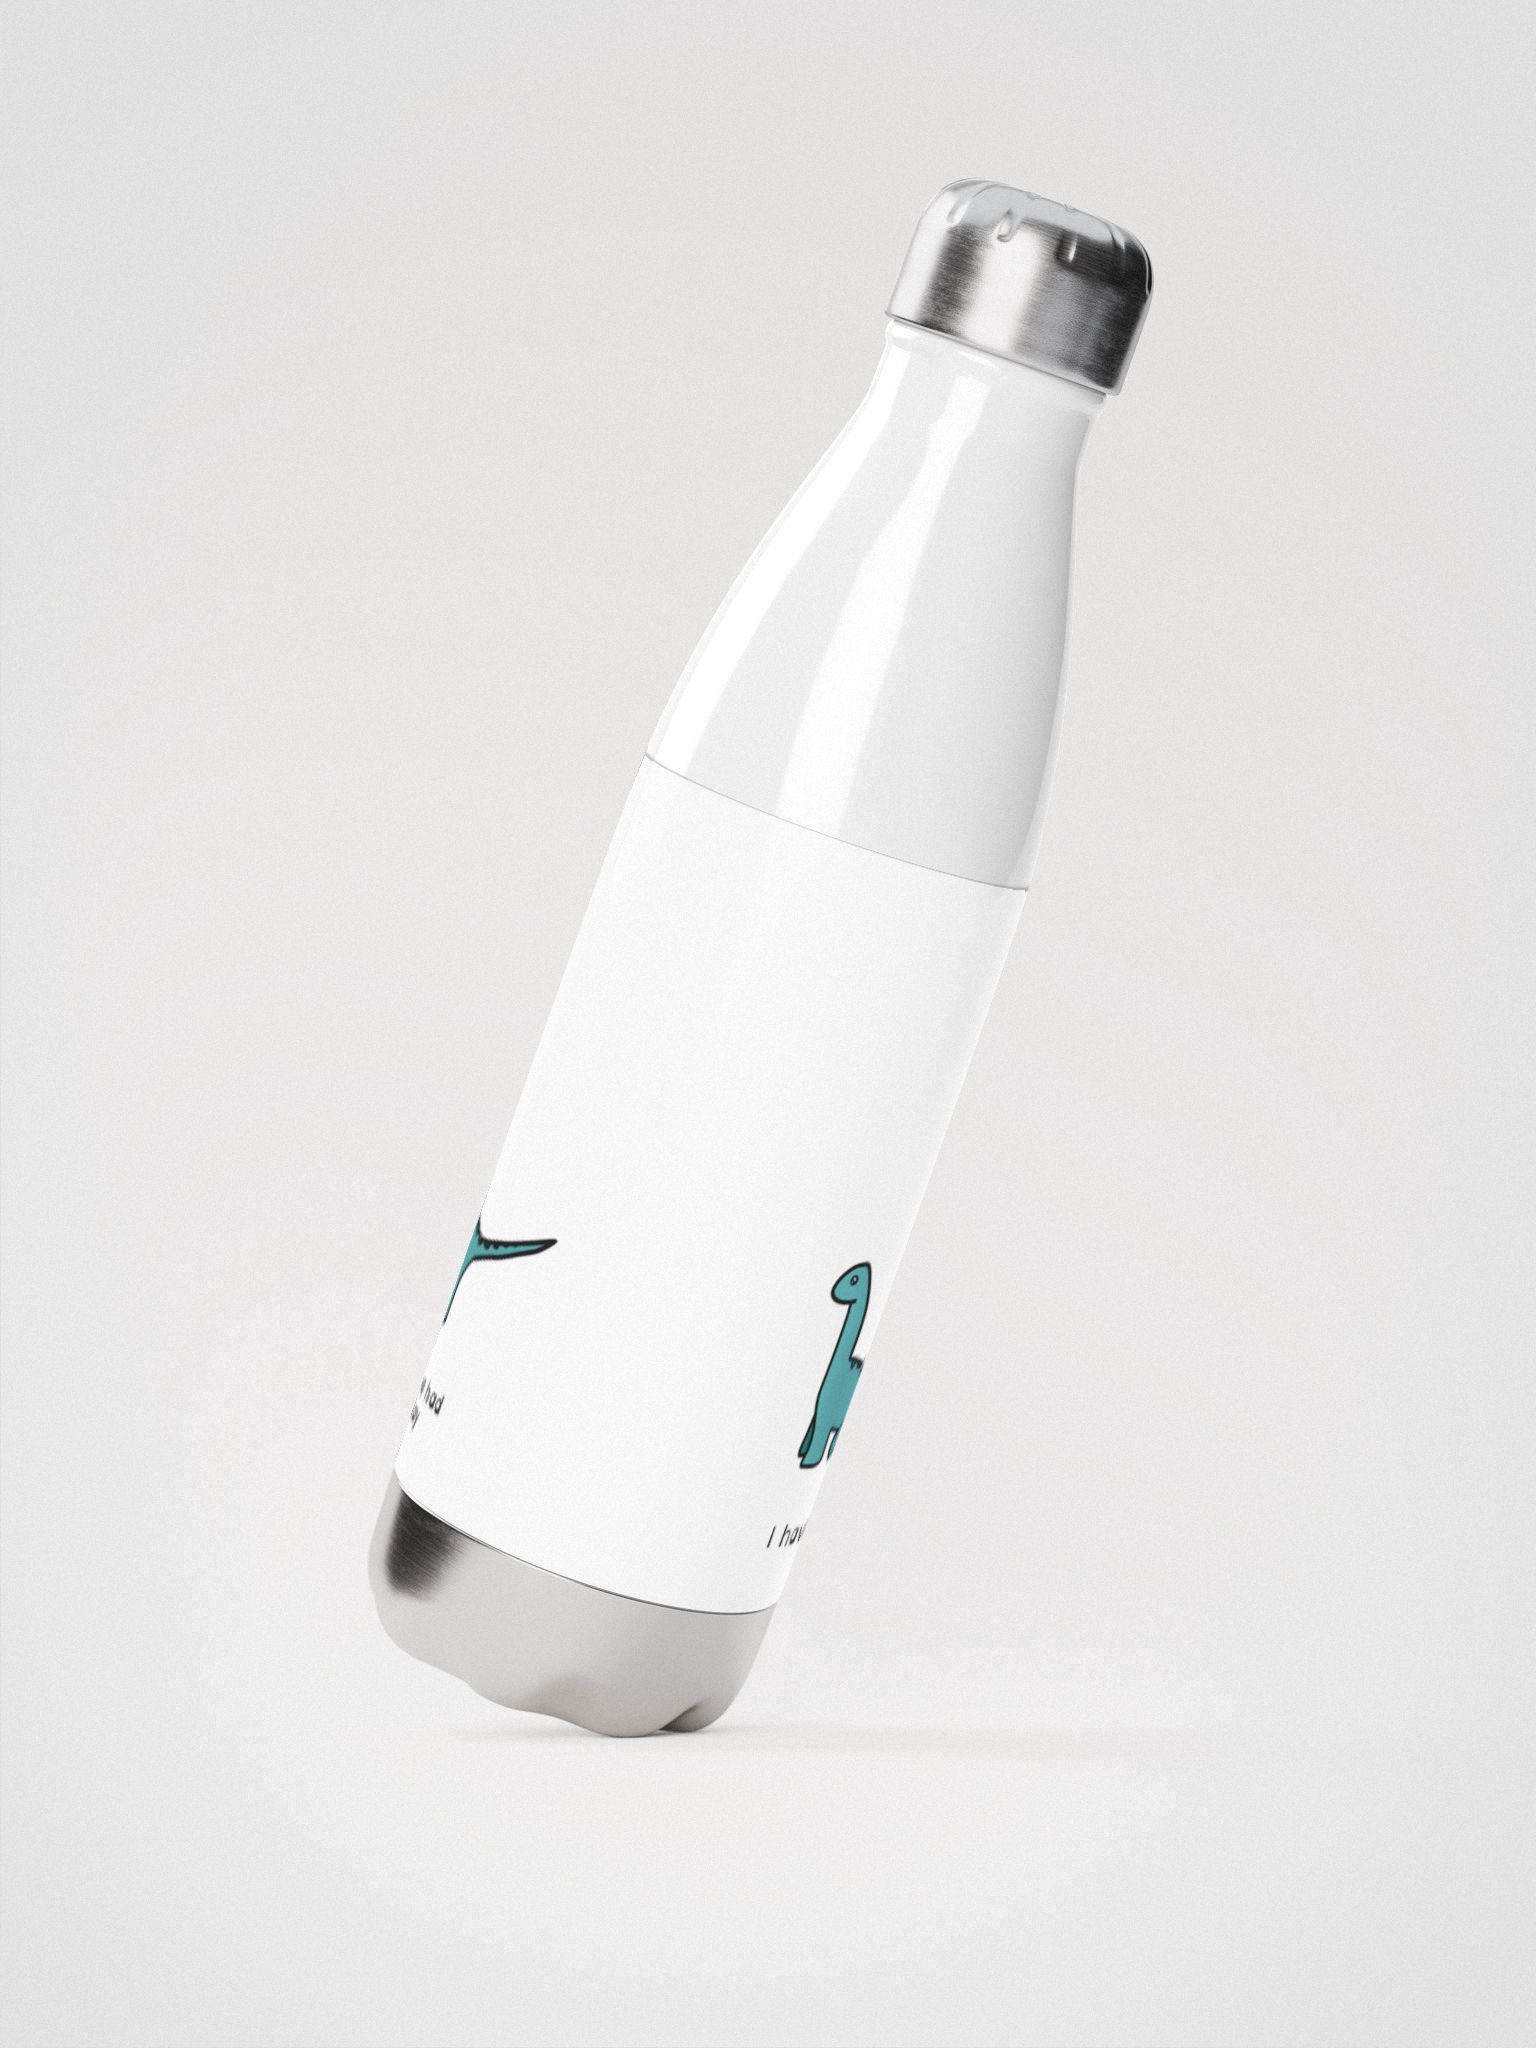 This $40 water bottle reportedly had a 30,000-person waiting list